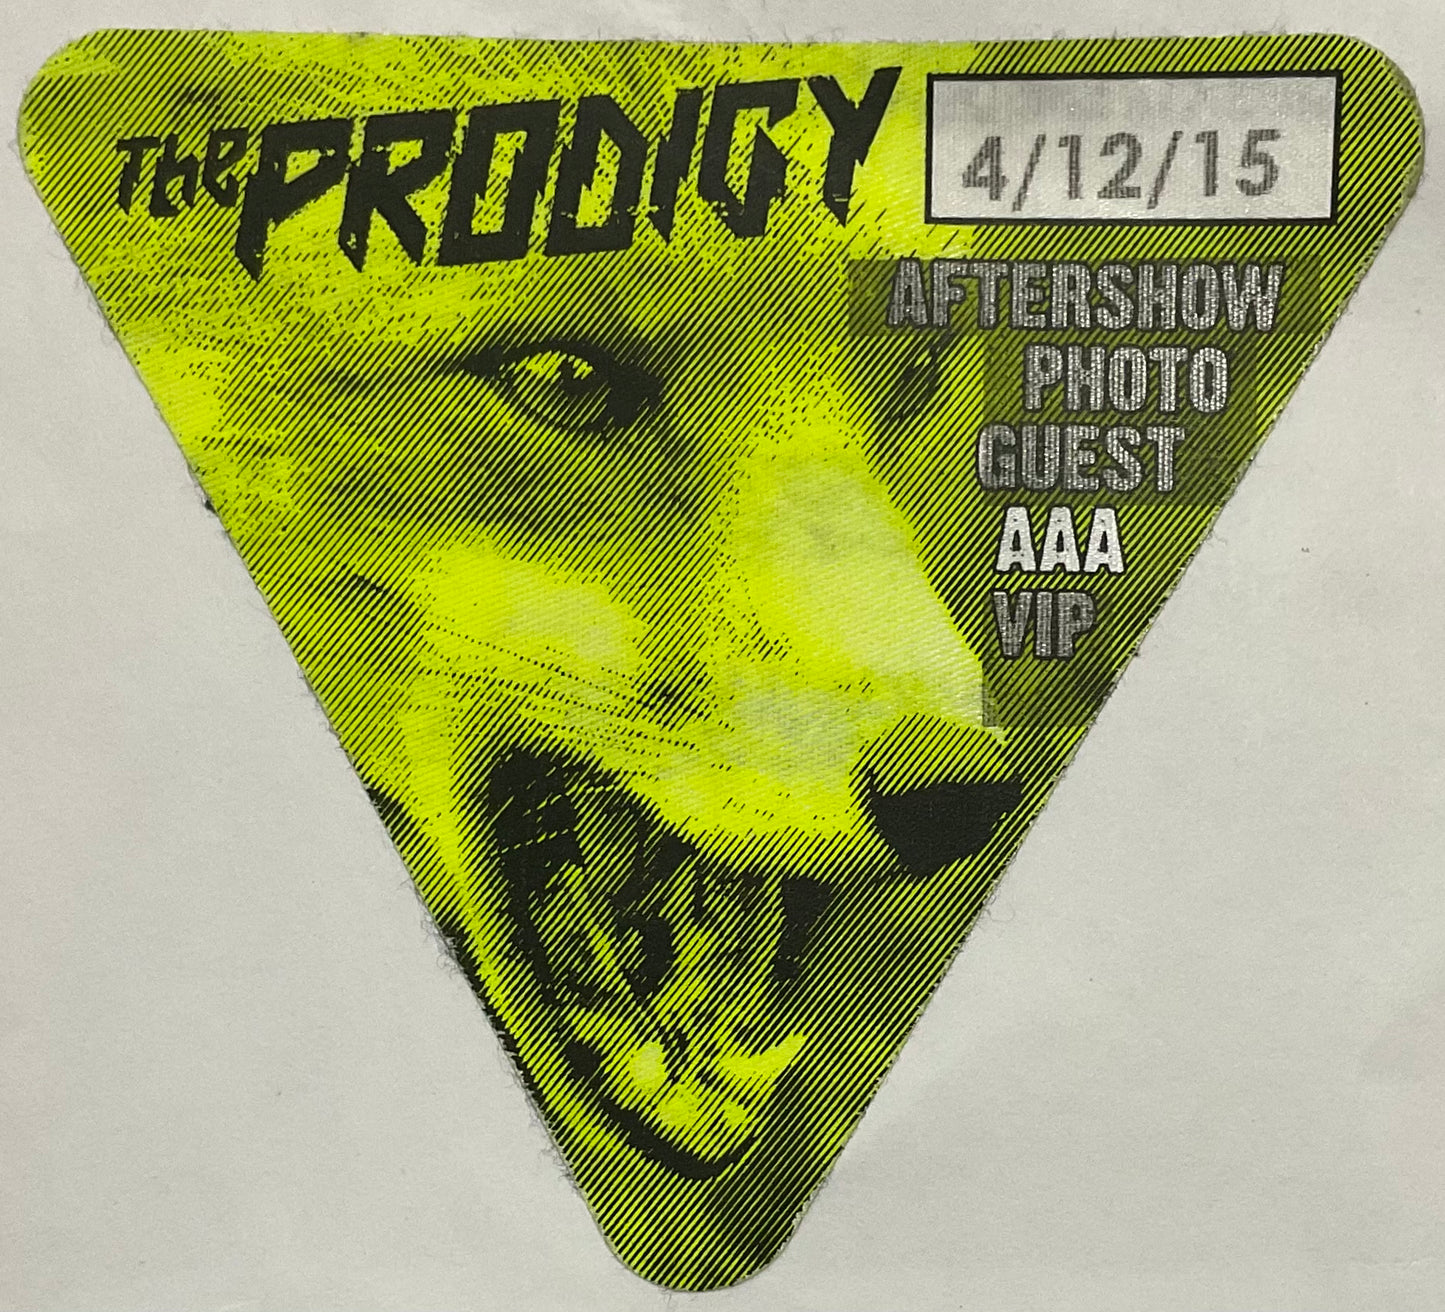 Prodigy Original Used Concert Backstage Pass Ticket SSE Wembley Arena London 4th Dec 2015